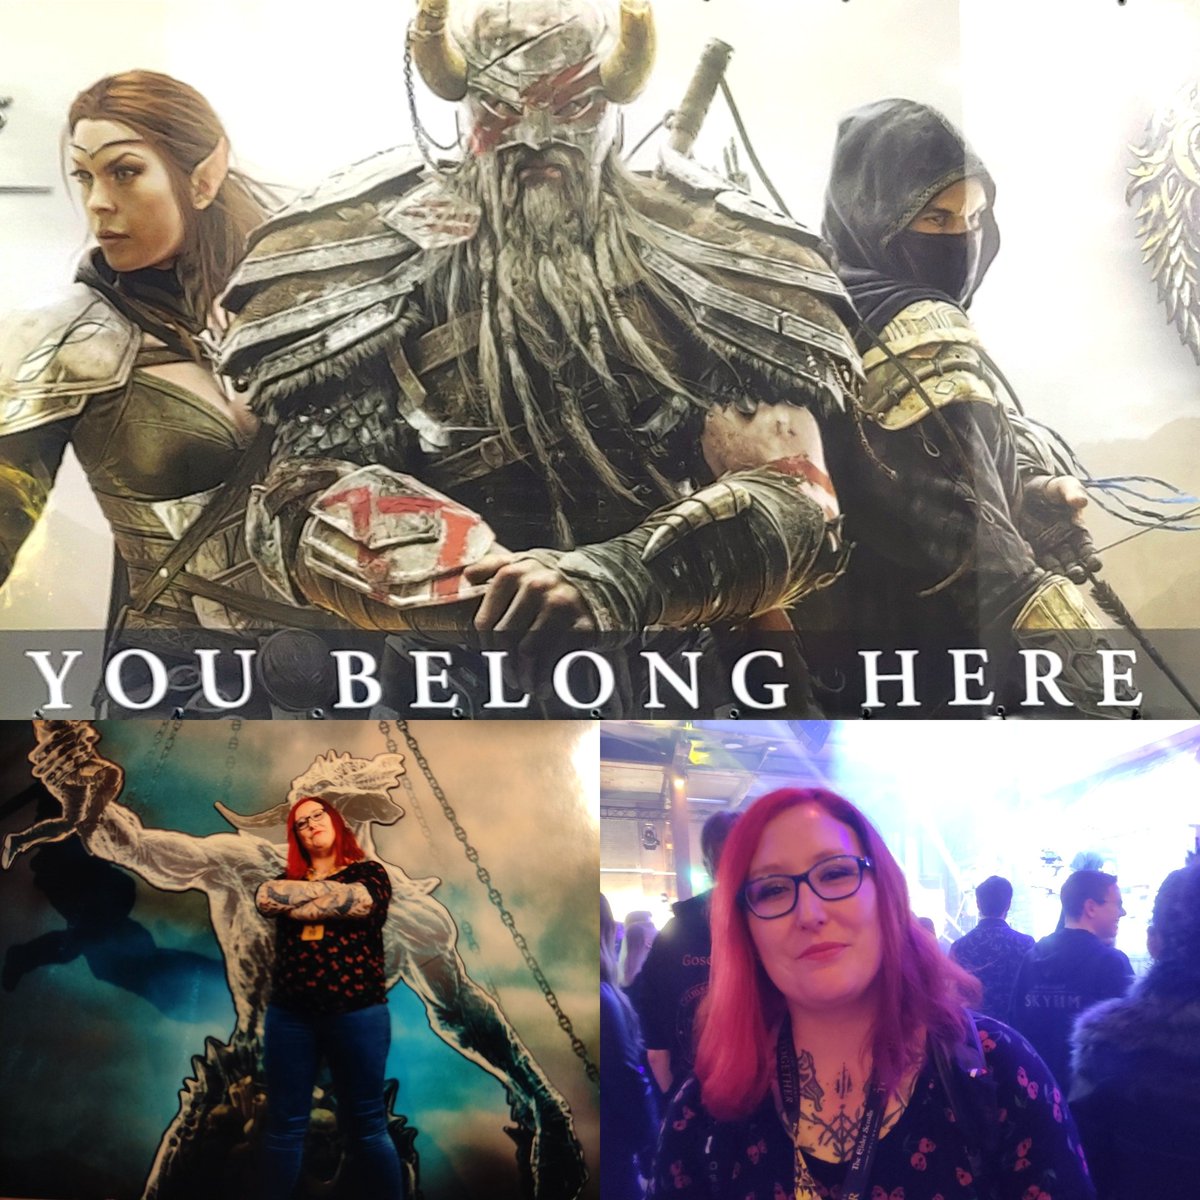 #ESO10 in Amsterdam has been an amazing ride and I met so many kind and amazing people!! 😍 Just like in the game, but without the pie throwing! 😂 🧁